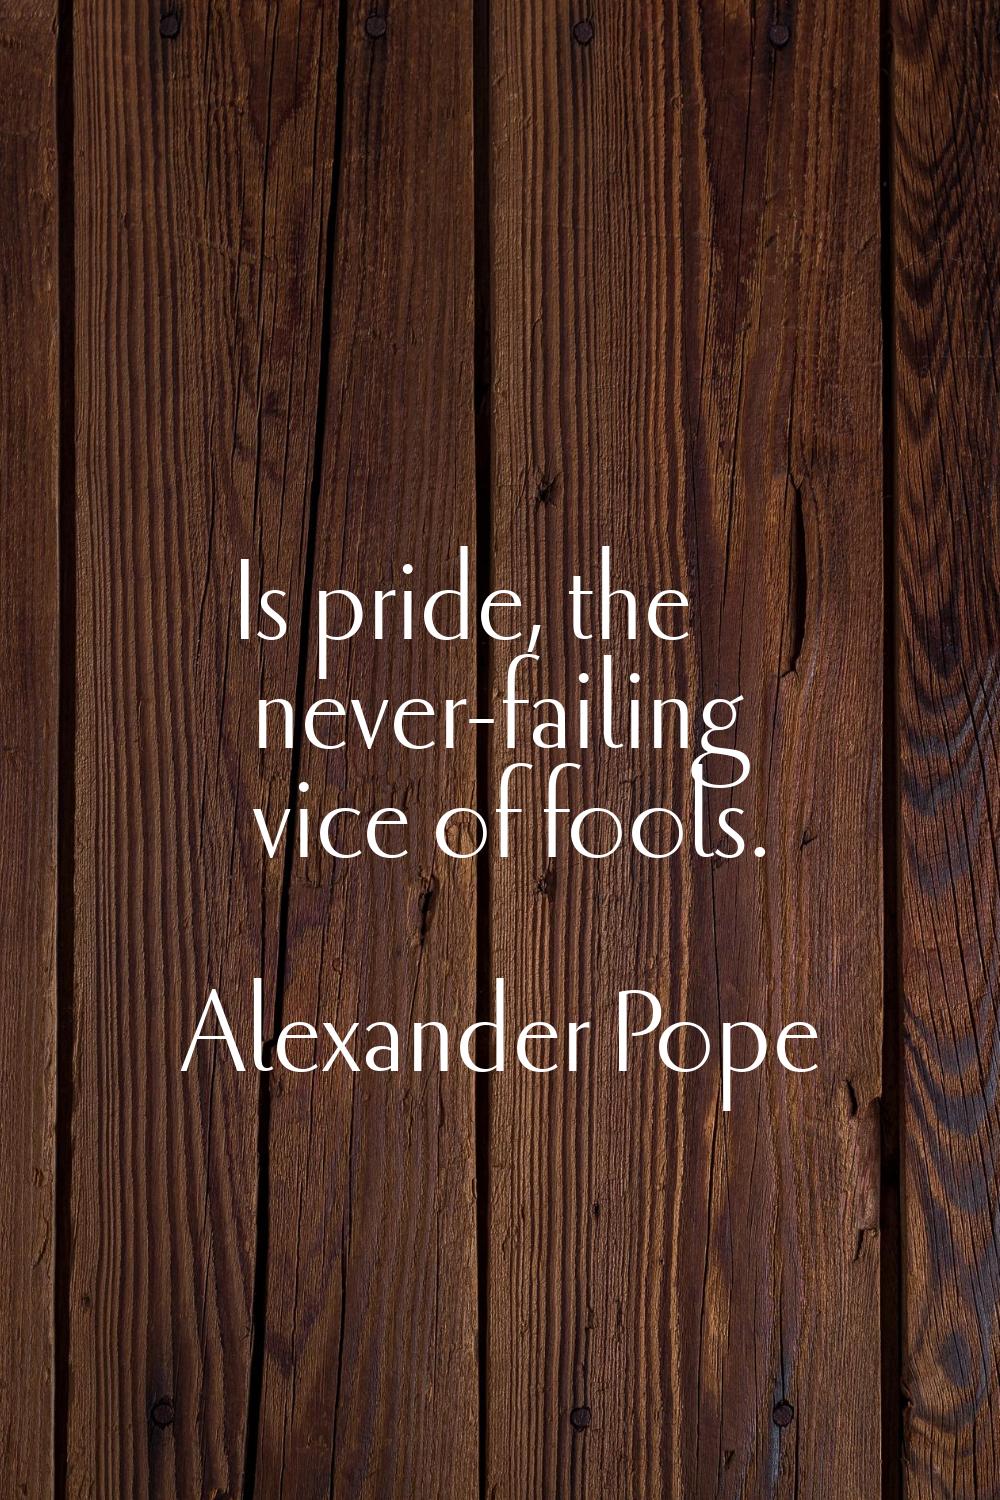 Is pride, the never-failing vice of fools.